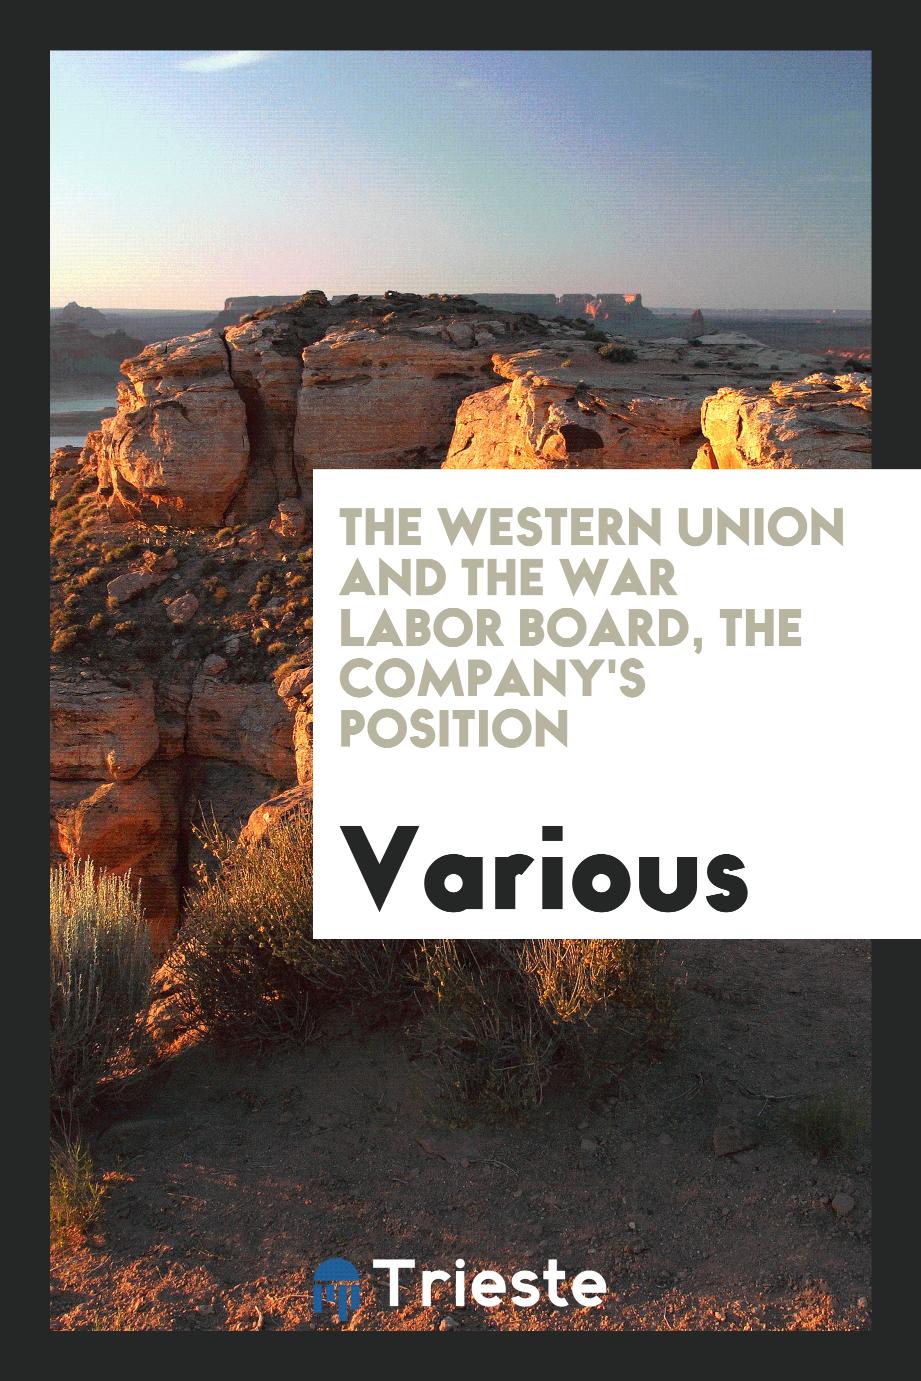 The Western Union and the War Labor Board, the Company's Position